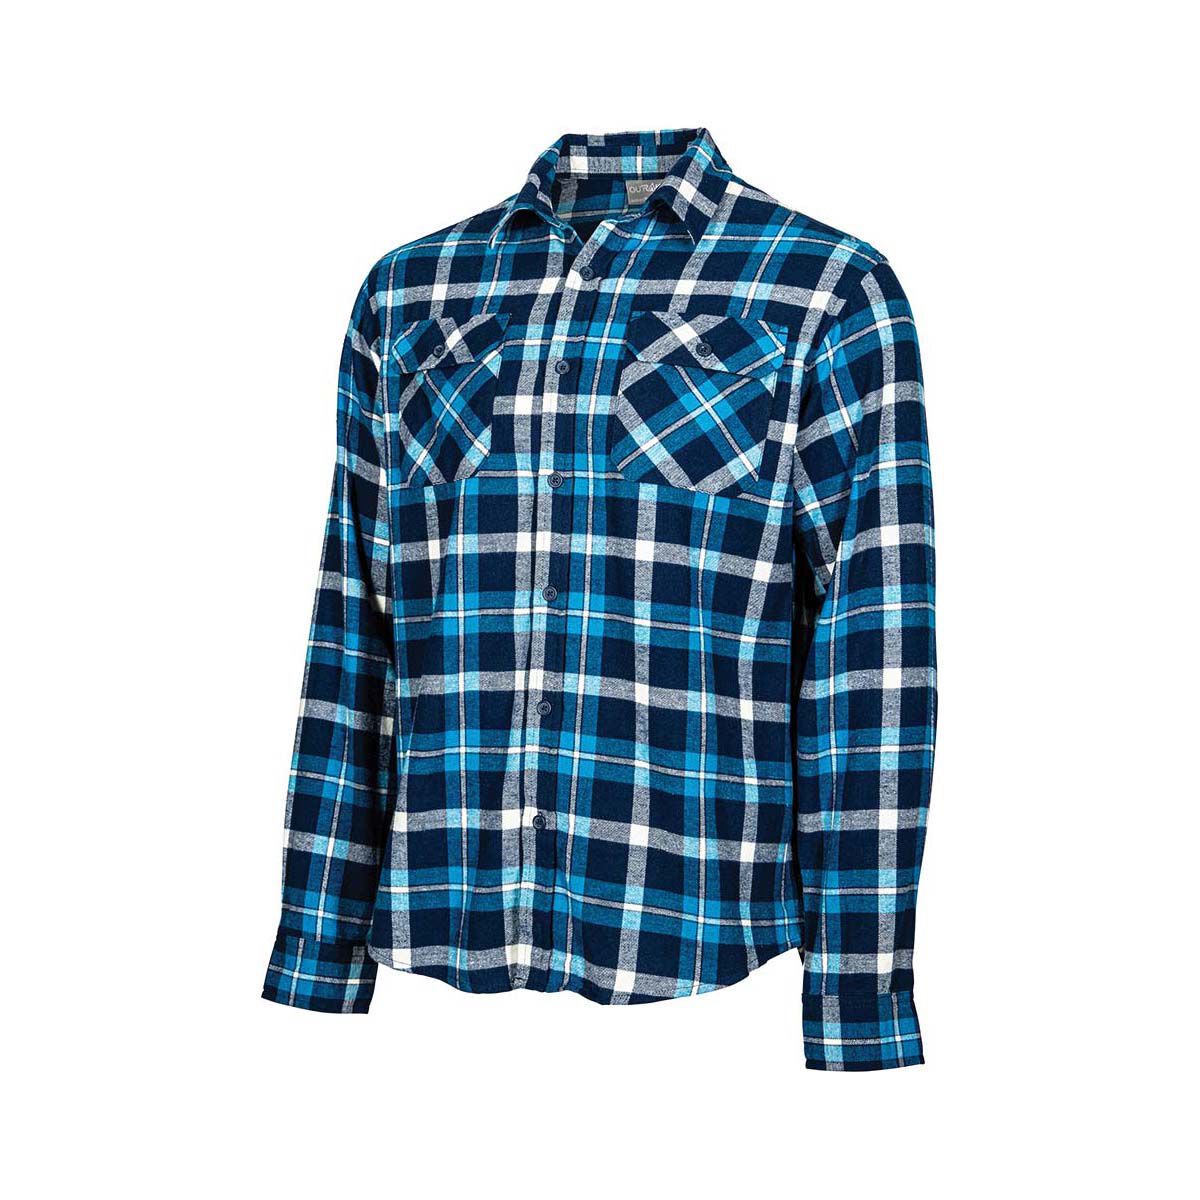 Buy bcf shirts mens - OFF-51% > Free Delivery